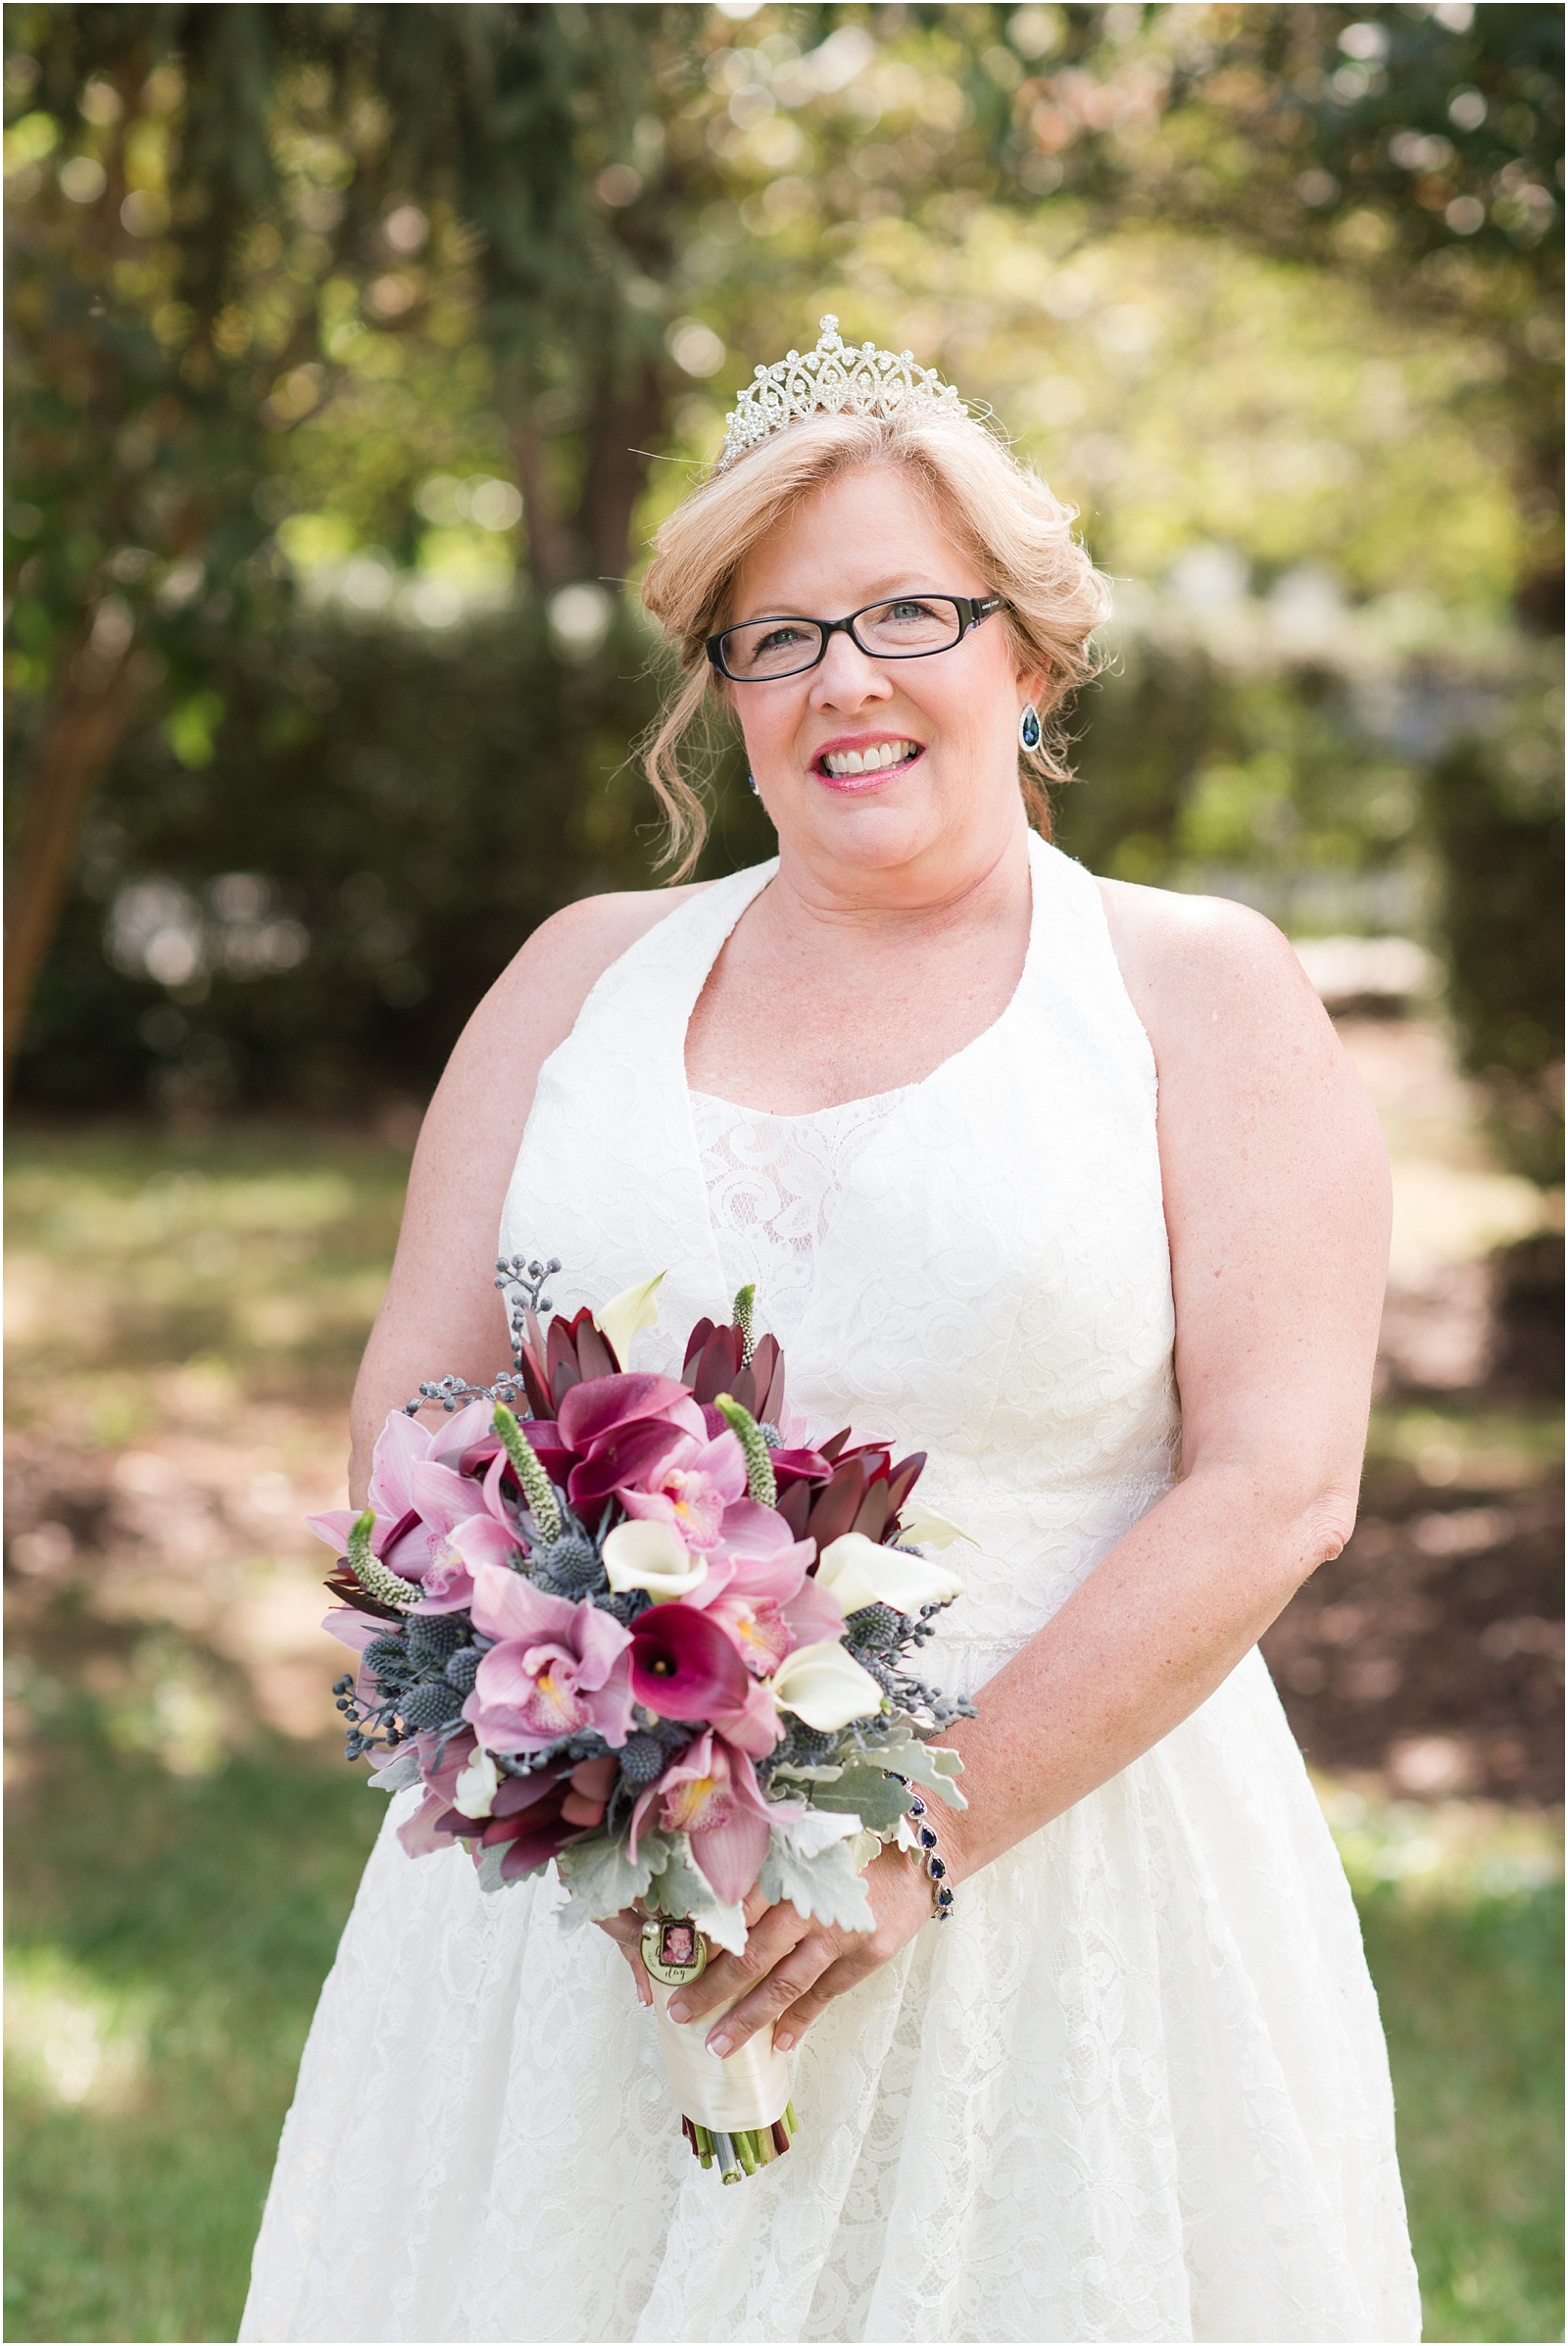 Michelle and Sara Photography, Michelle and Sara weddings, michelle robinson photography, burke manor inn, bride details, bouquet, floral details for bride, fall wedding, purple floral